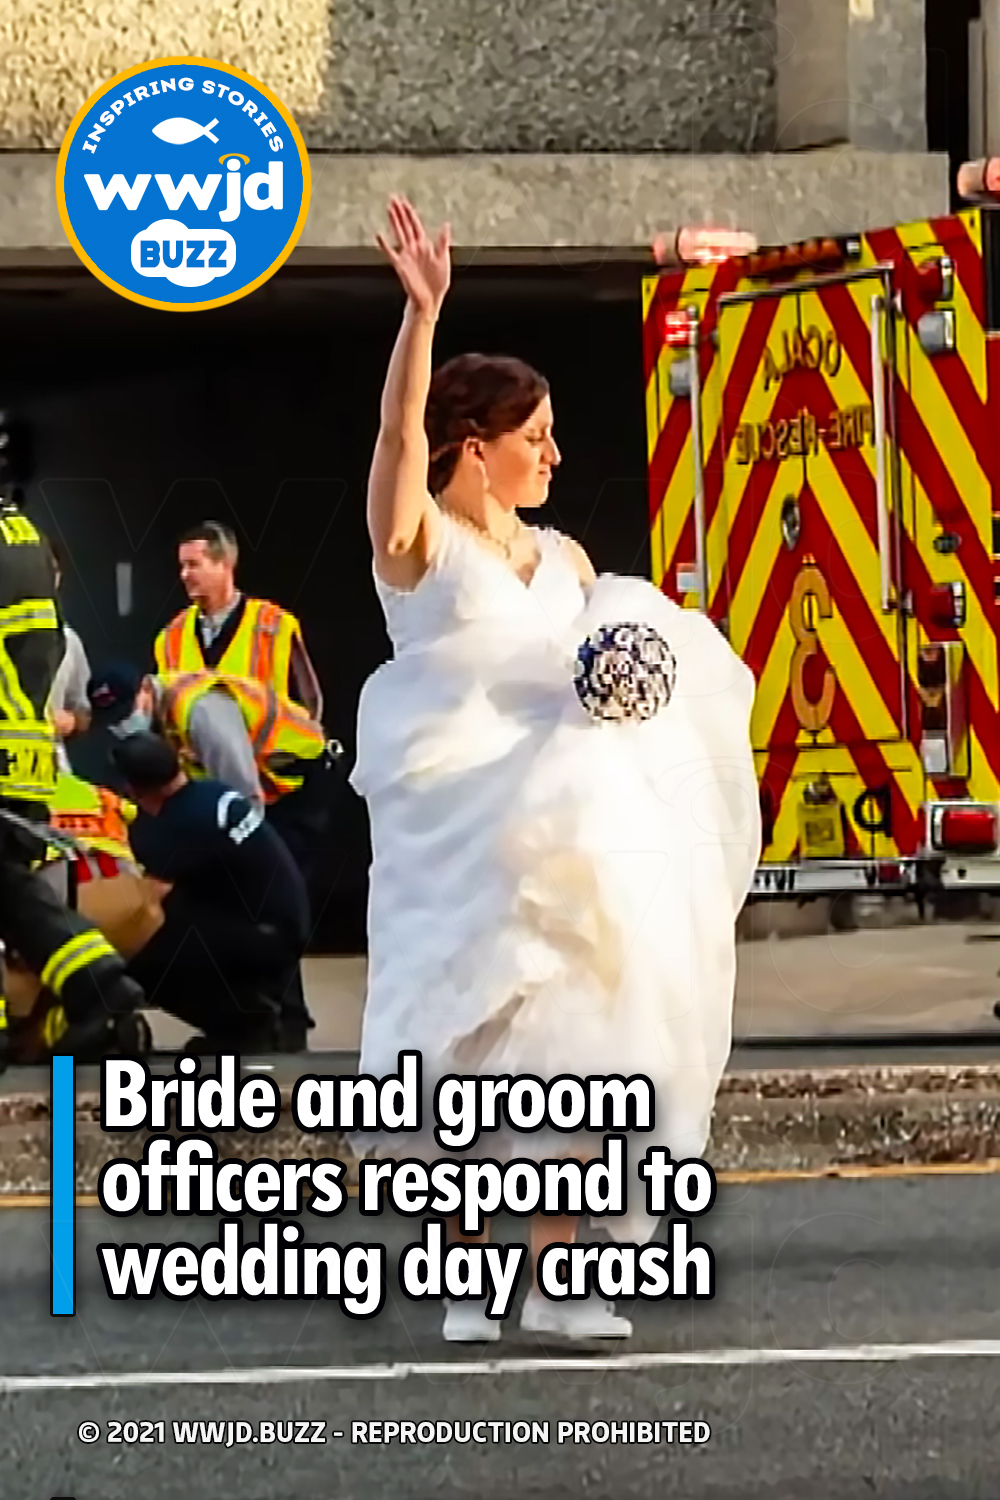 Bride and groom officers respond to wedding day crash